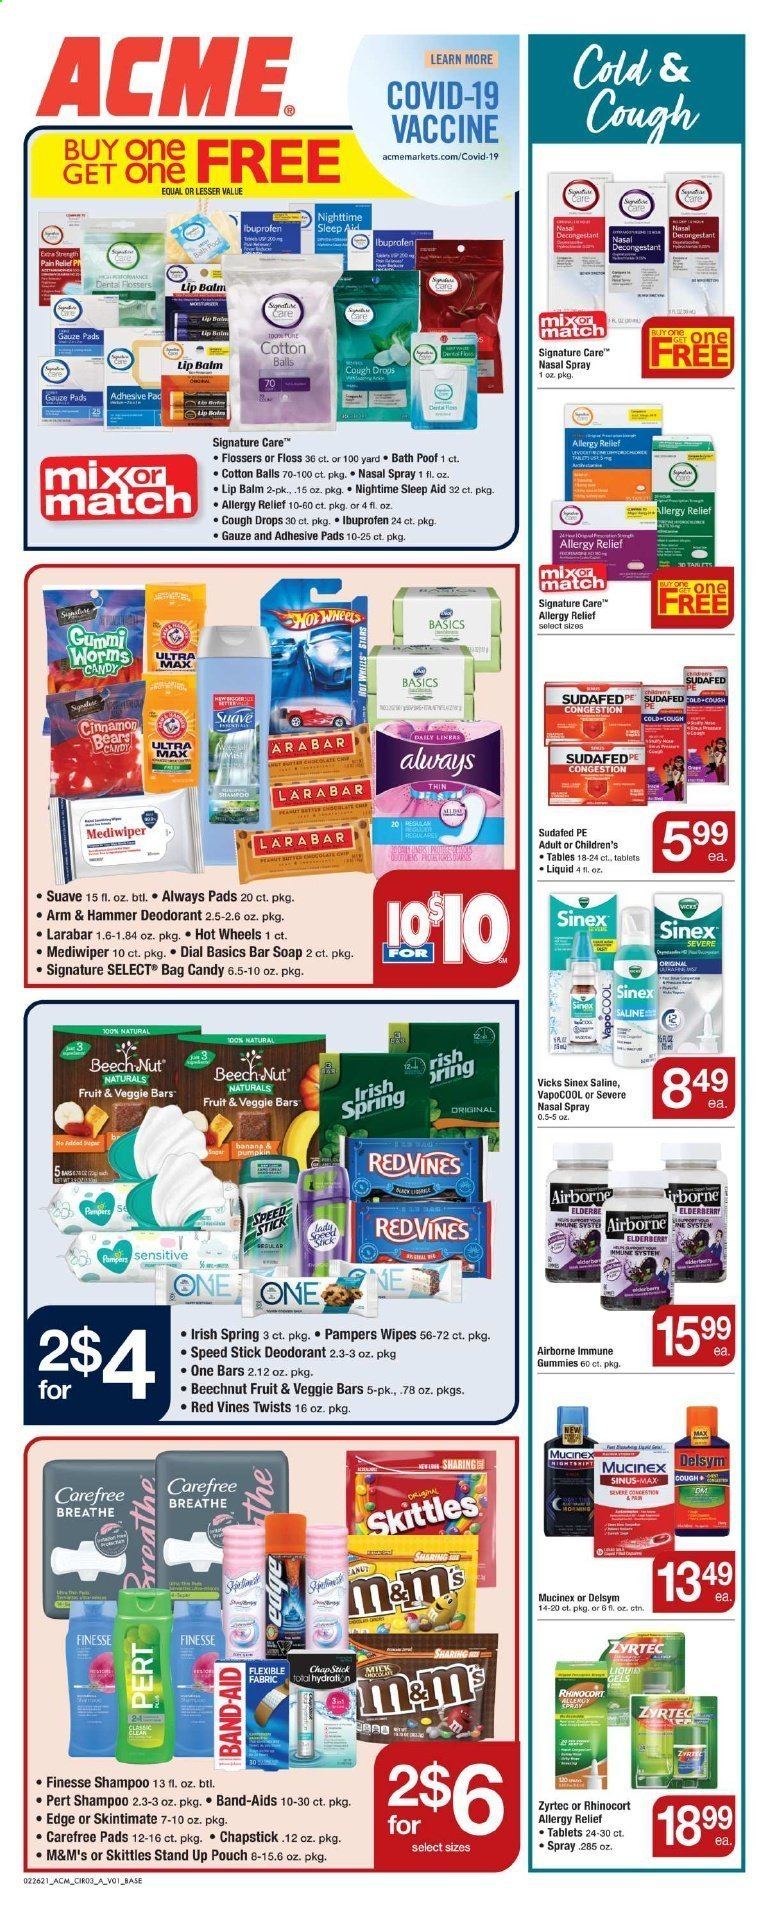 thumbnail - ACME Flyer - 02/26/2021 - 03/04/2021 - Sales products - milk, M&M's, Skittles, ARM & HAMMER, cinnamon, Pampers, cotton balls, wipes, shampoo, Suave, soap bar, Dial, soap, Always pads, Carefree, lip balm, anti-perspirant, Speed Stick, deodorant, Yard, Vicks, bag, Hot Wheels, Delsym, Mucinex, Sudafed, Zyrtec, Ibuprofen, cough drops, nasal spray, allergy relief, Sinex. Page 4.